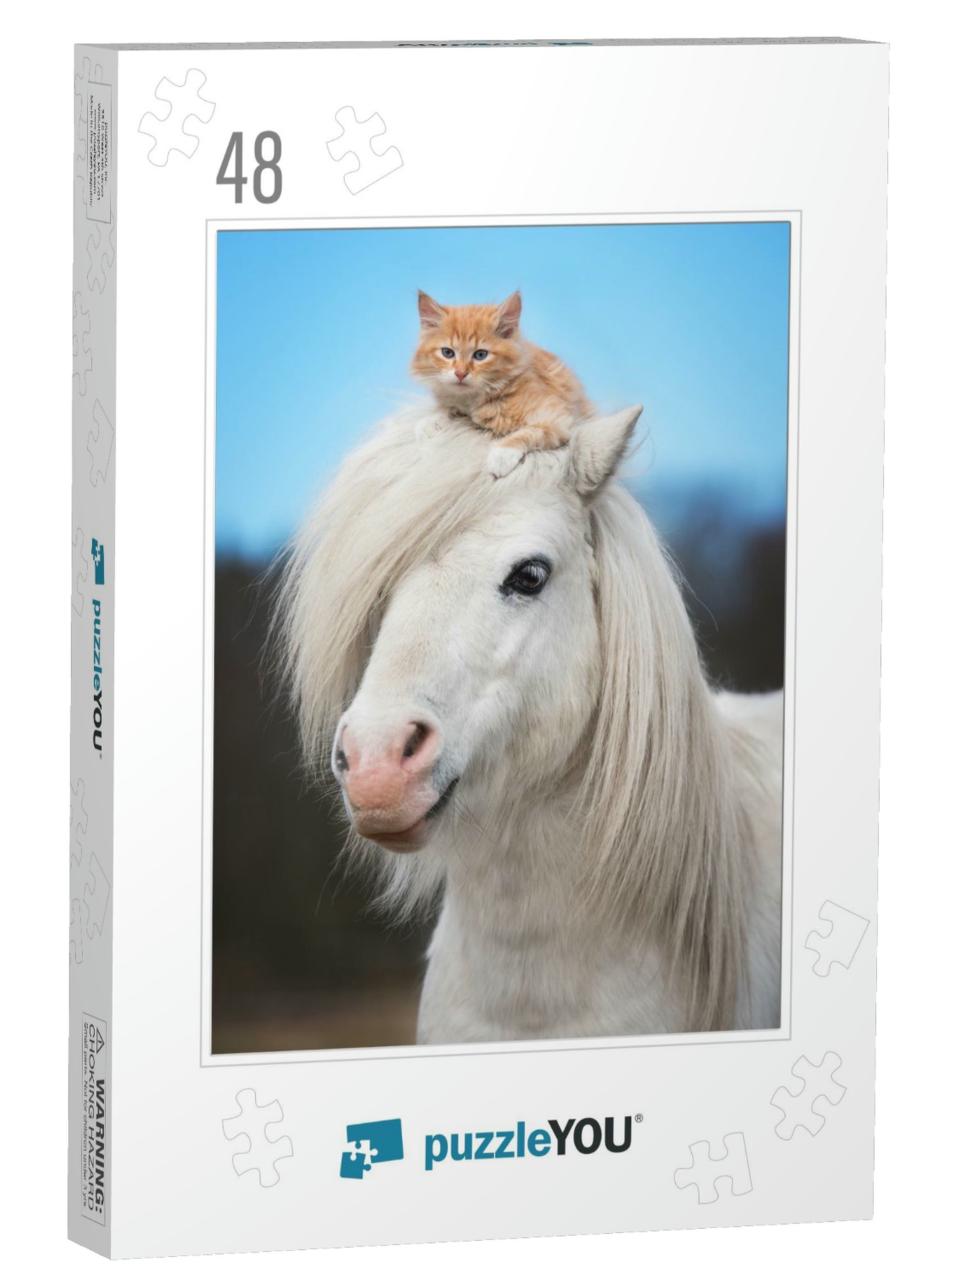 Little Red Kitten Sitting on the Head of White Shetland P... Jigsaw Puzzle with 48 pieces